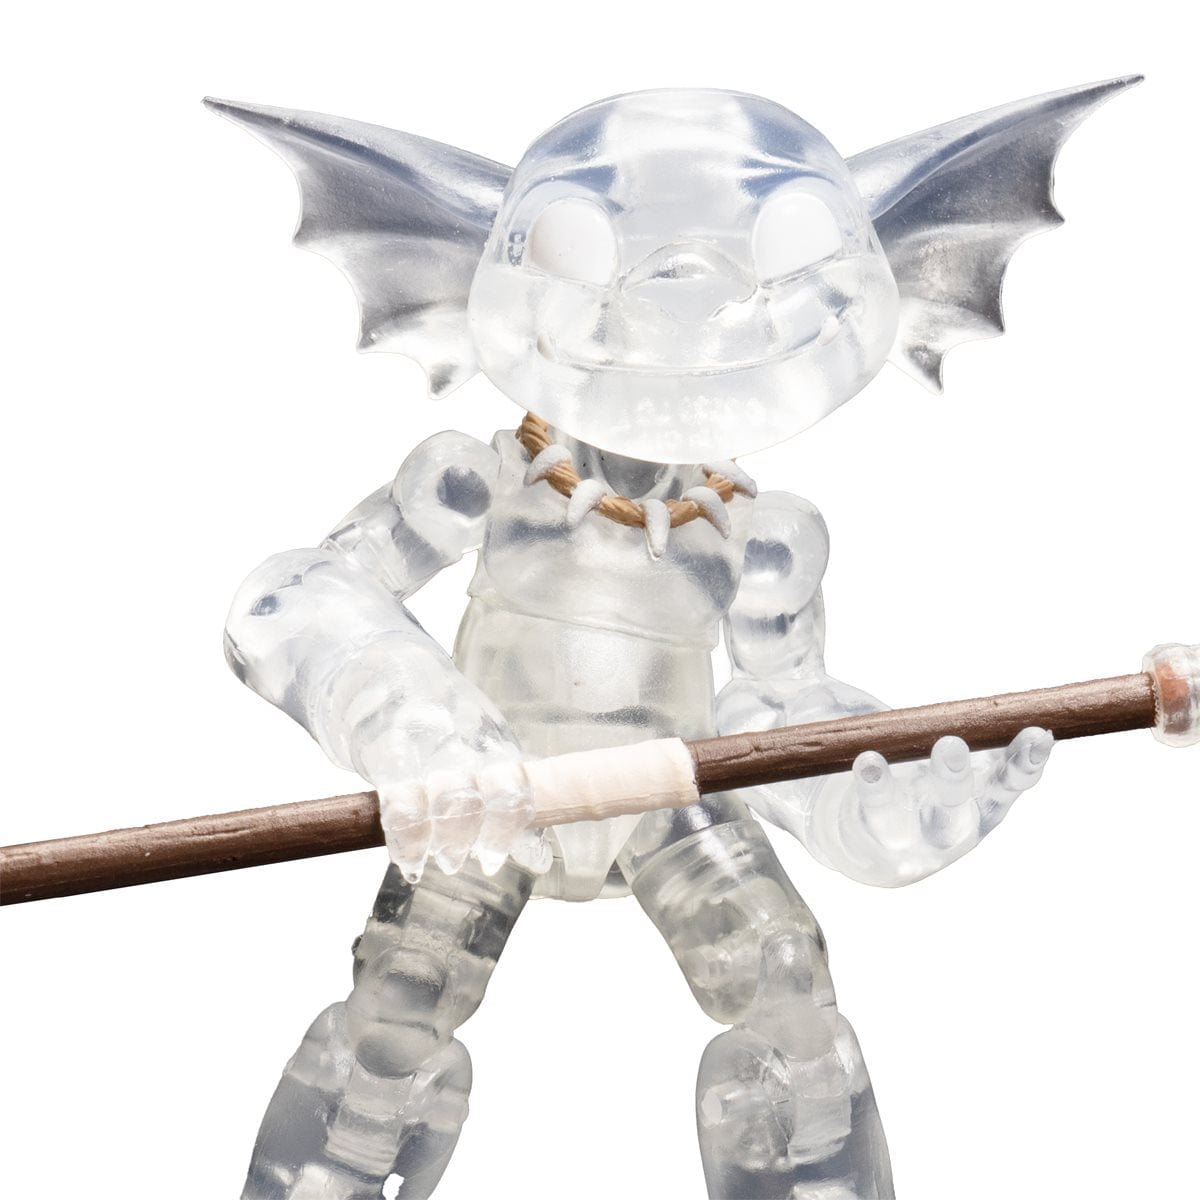 Plunderlings Drench Arctic Clear Variant 1:12 Scale Action Figure - Convention Exclusive - Pop-O-Loco - Lone Coconut